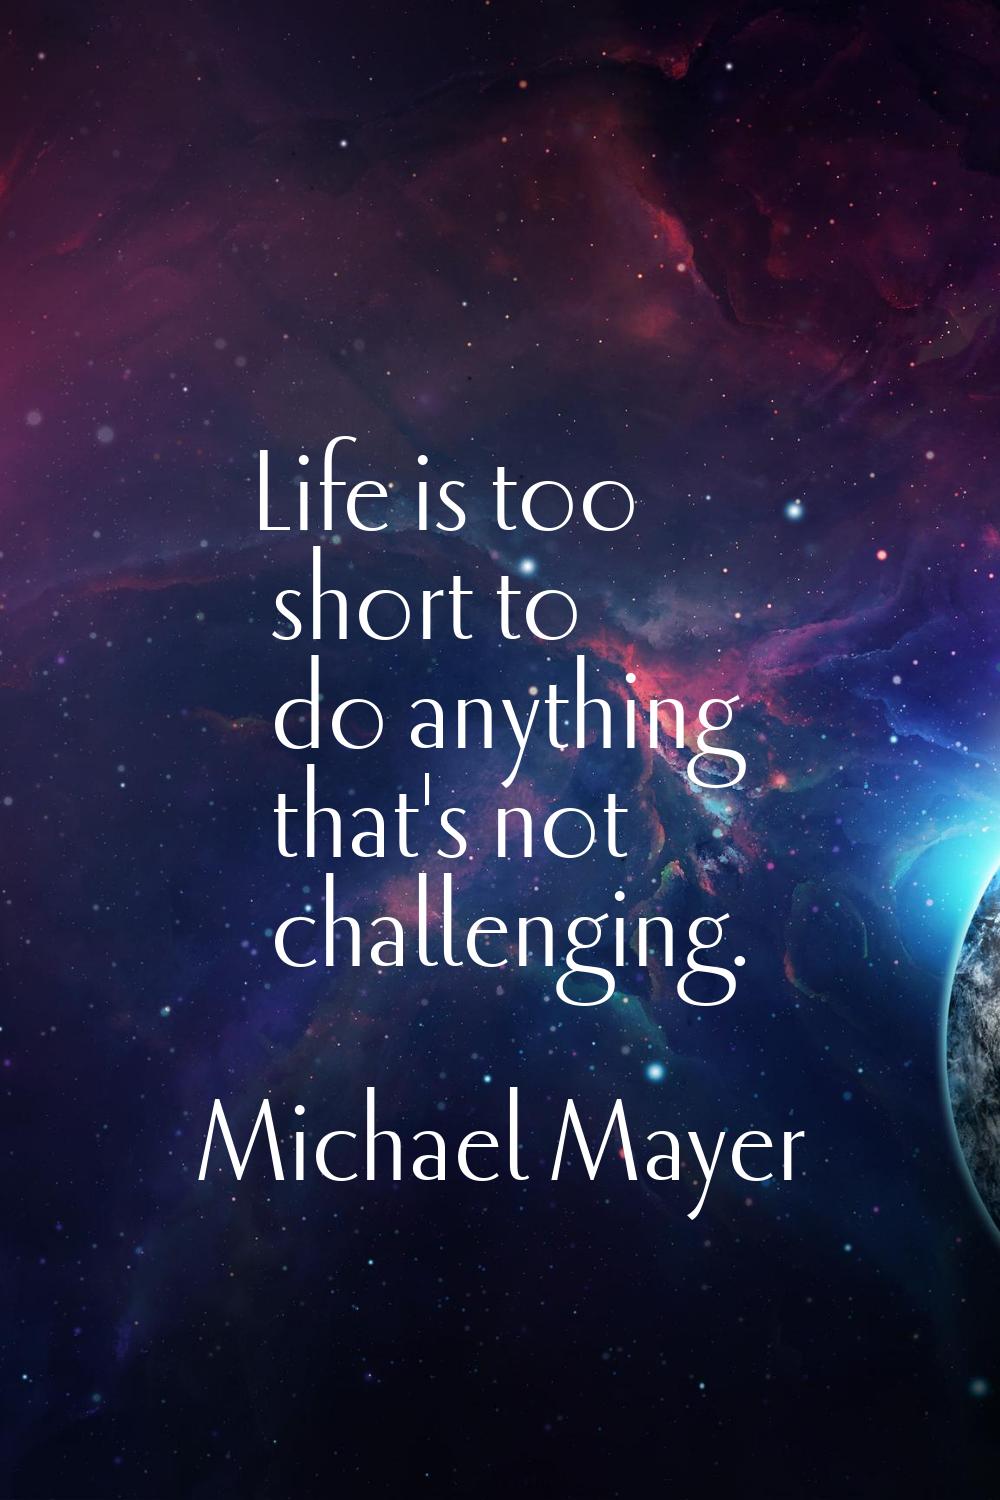 Life is too short to do anything that's not challenging.